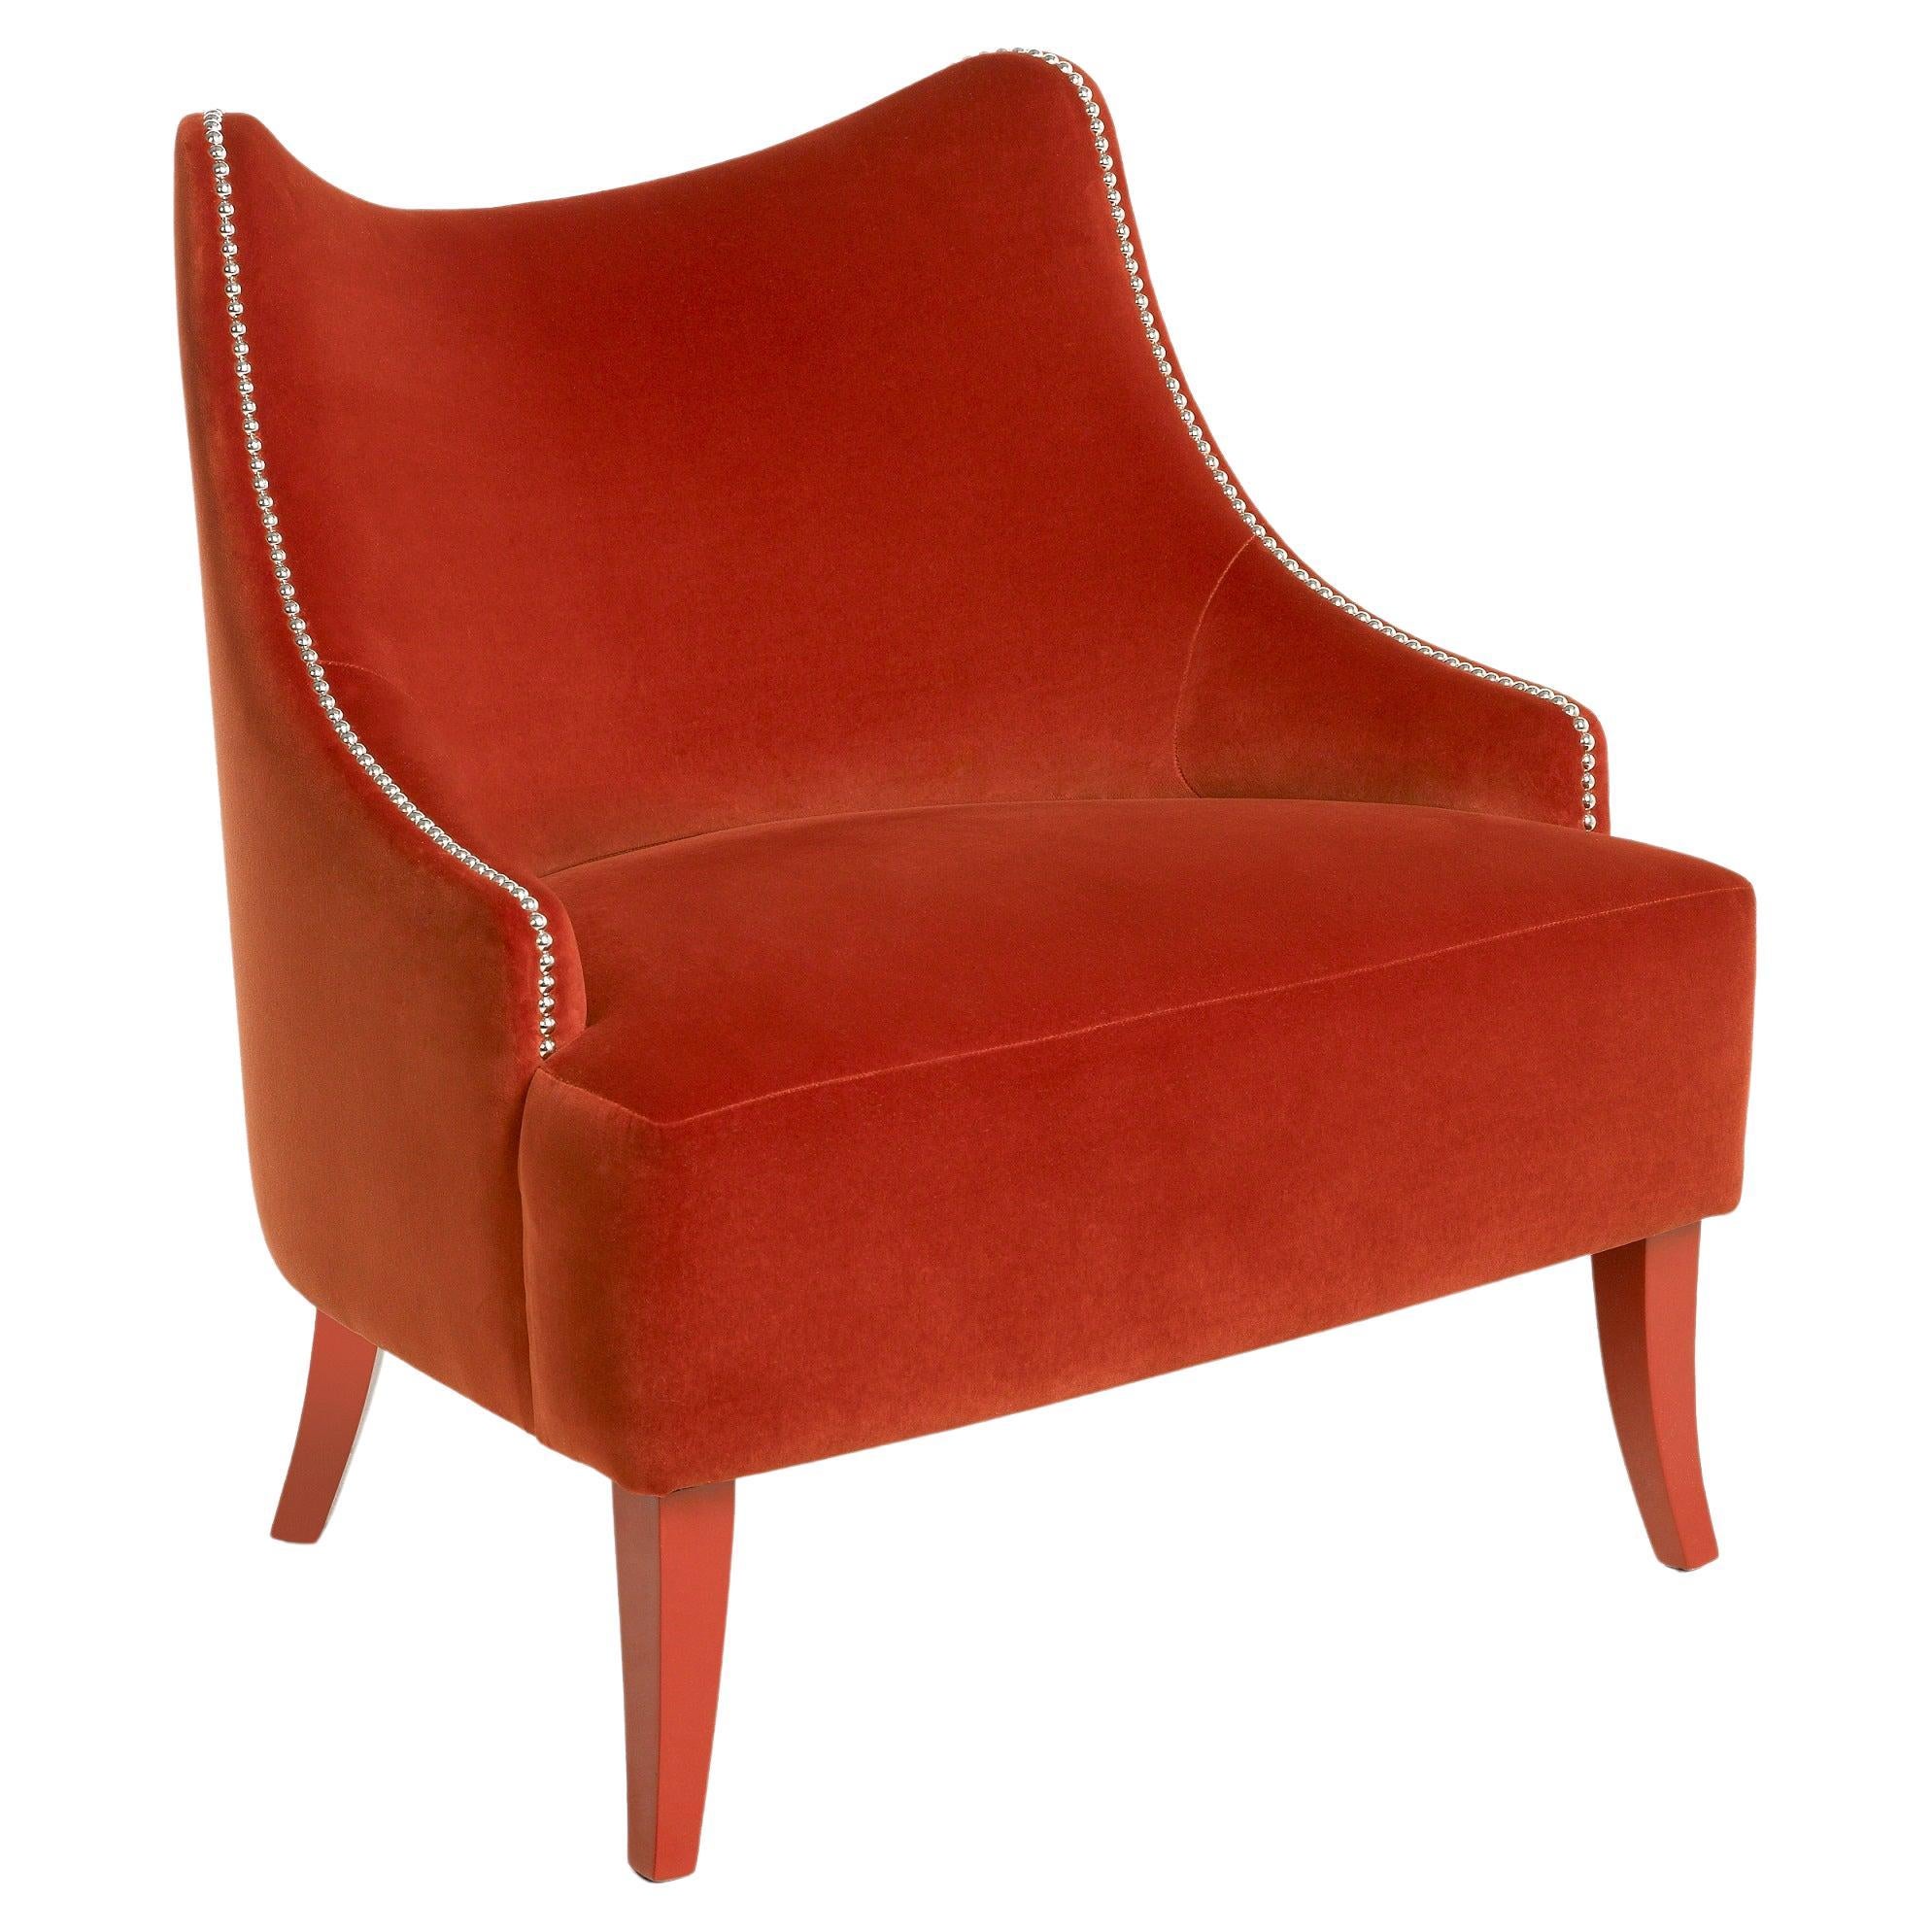 Contemporary Velvet Armchair Offered With Nails On The Curve & Back For Sale